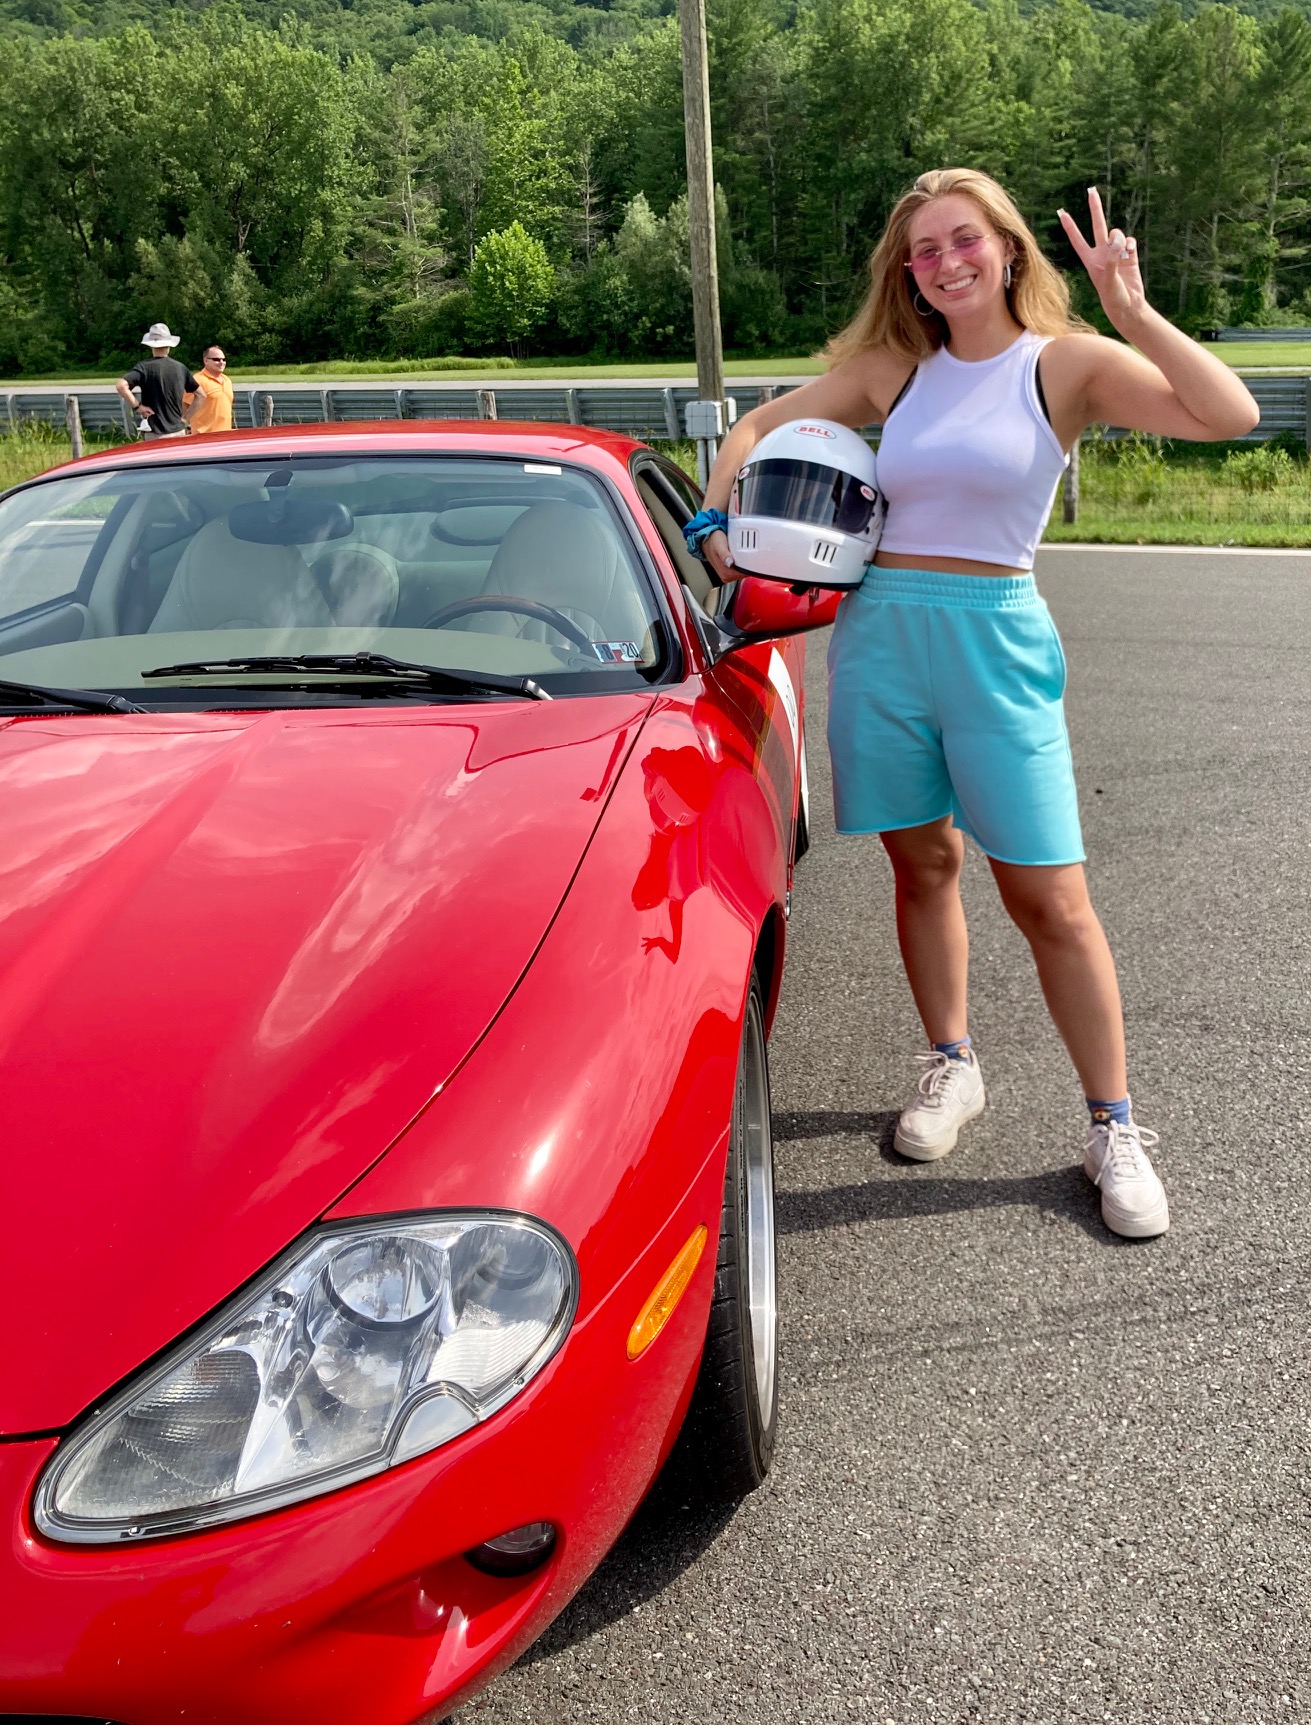 3rd generation member Victoria Clarkson at Lime Rock Park